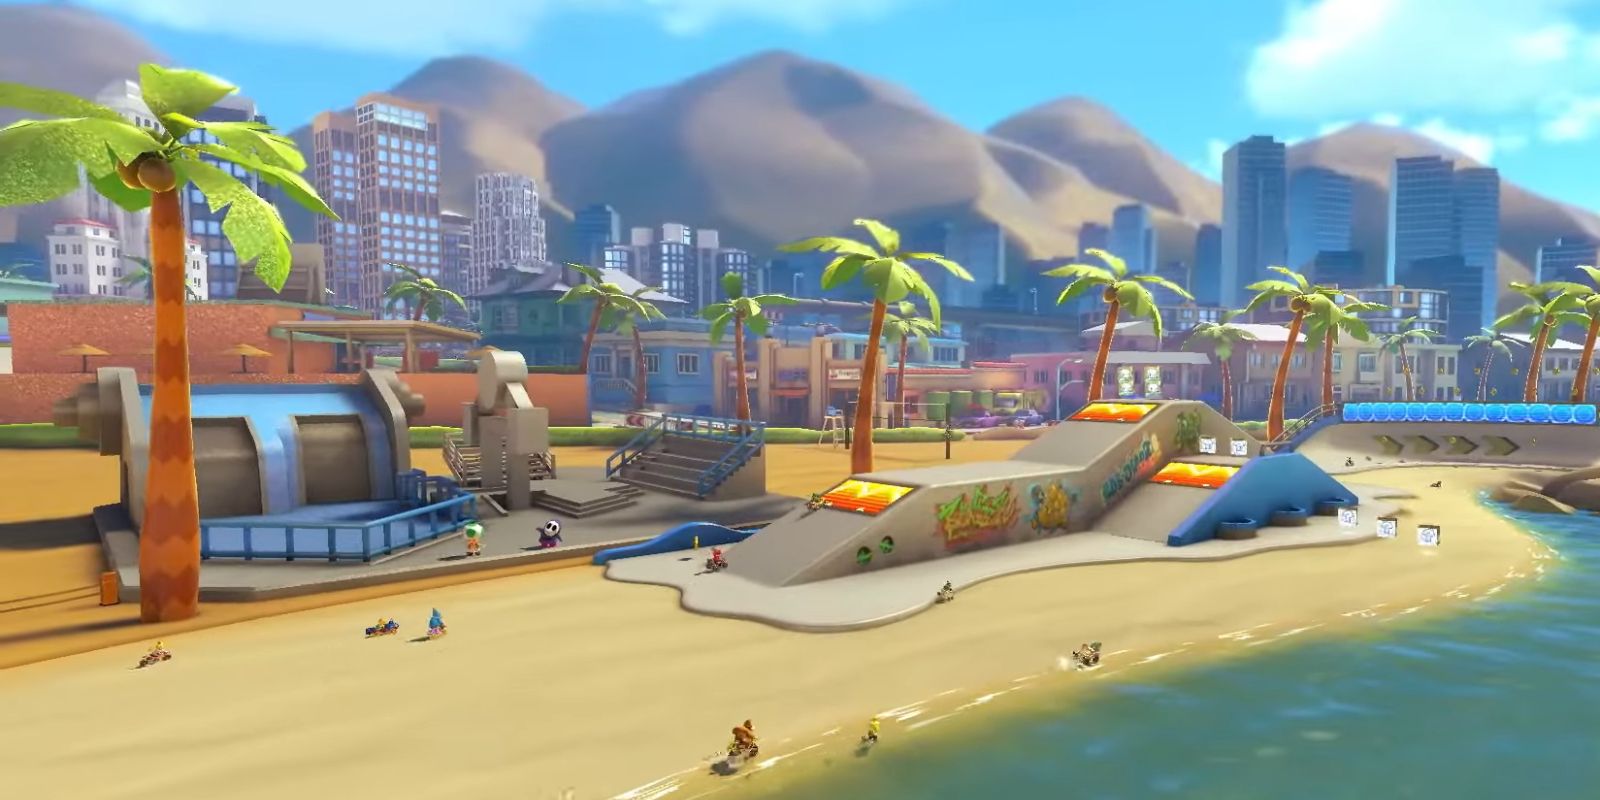 An aerial view of the Los Angeles Laps track in Mario Kart 8, showing racers driving along the beach near a facsimile of the LA skyline.